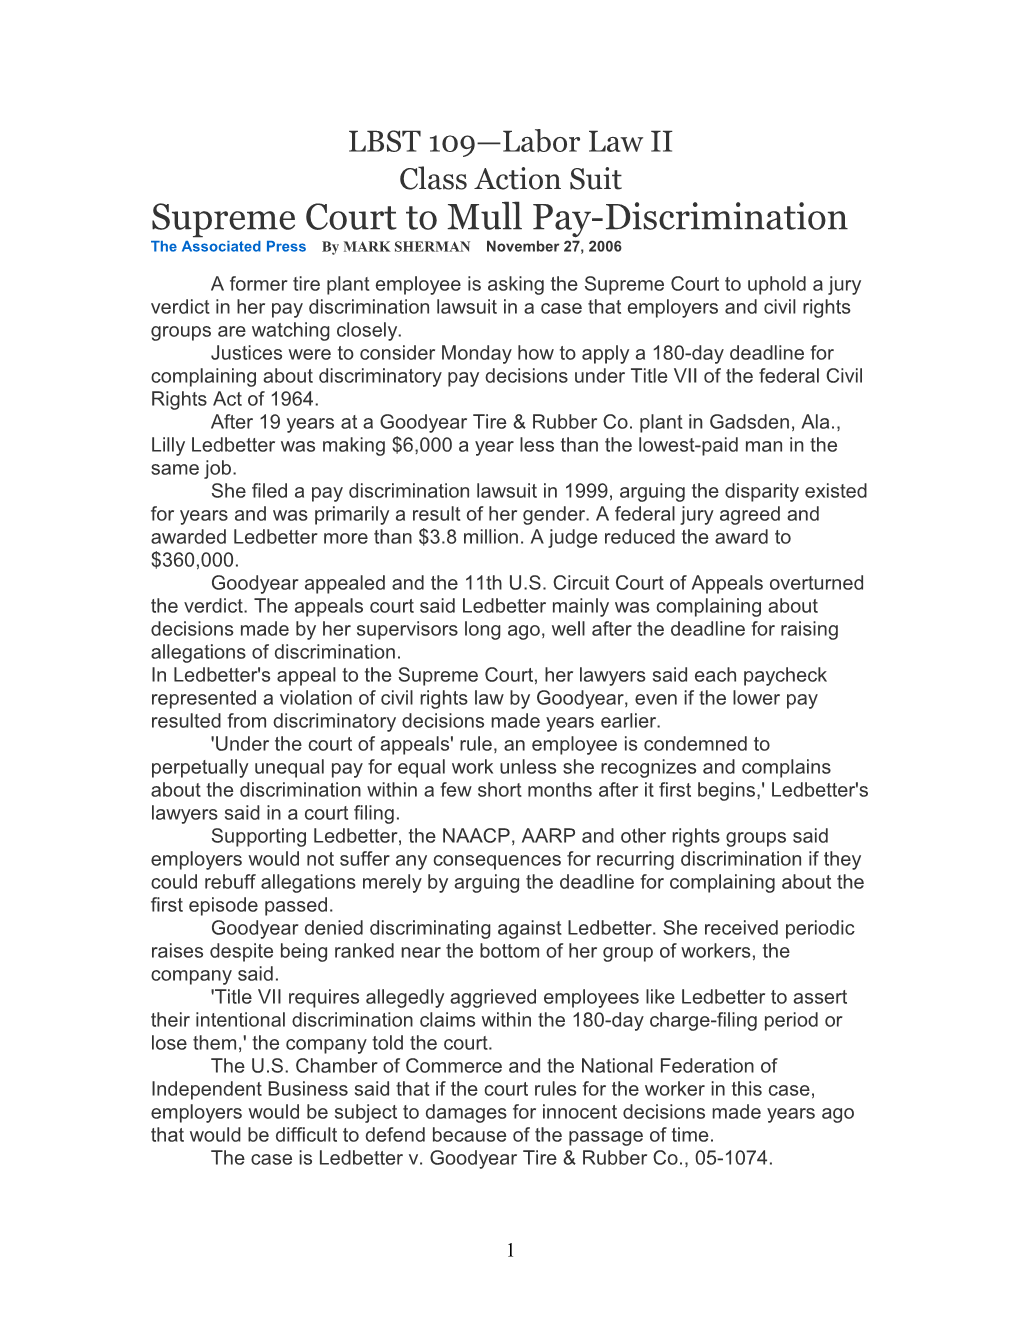 Supreme Court to Mull Pay-Discrimination